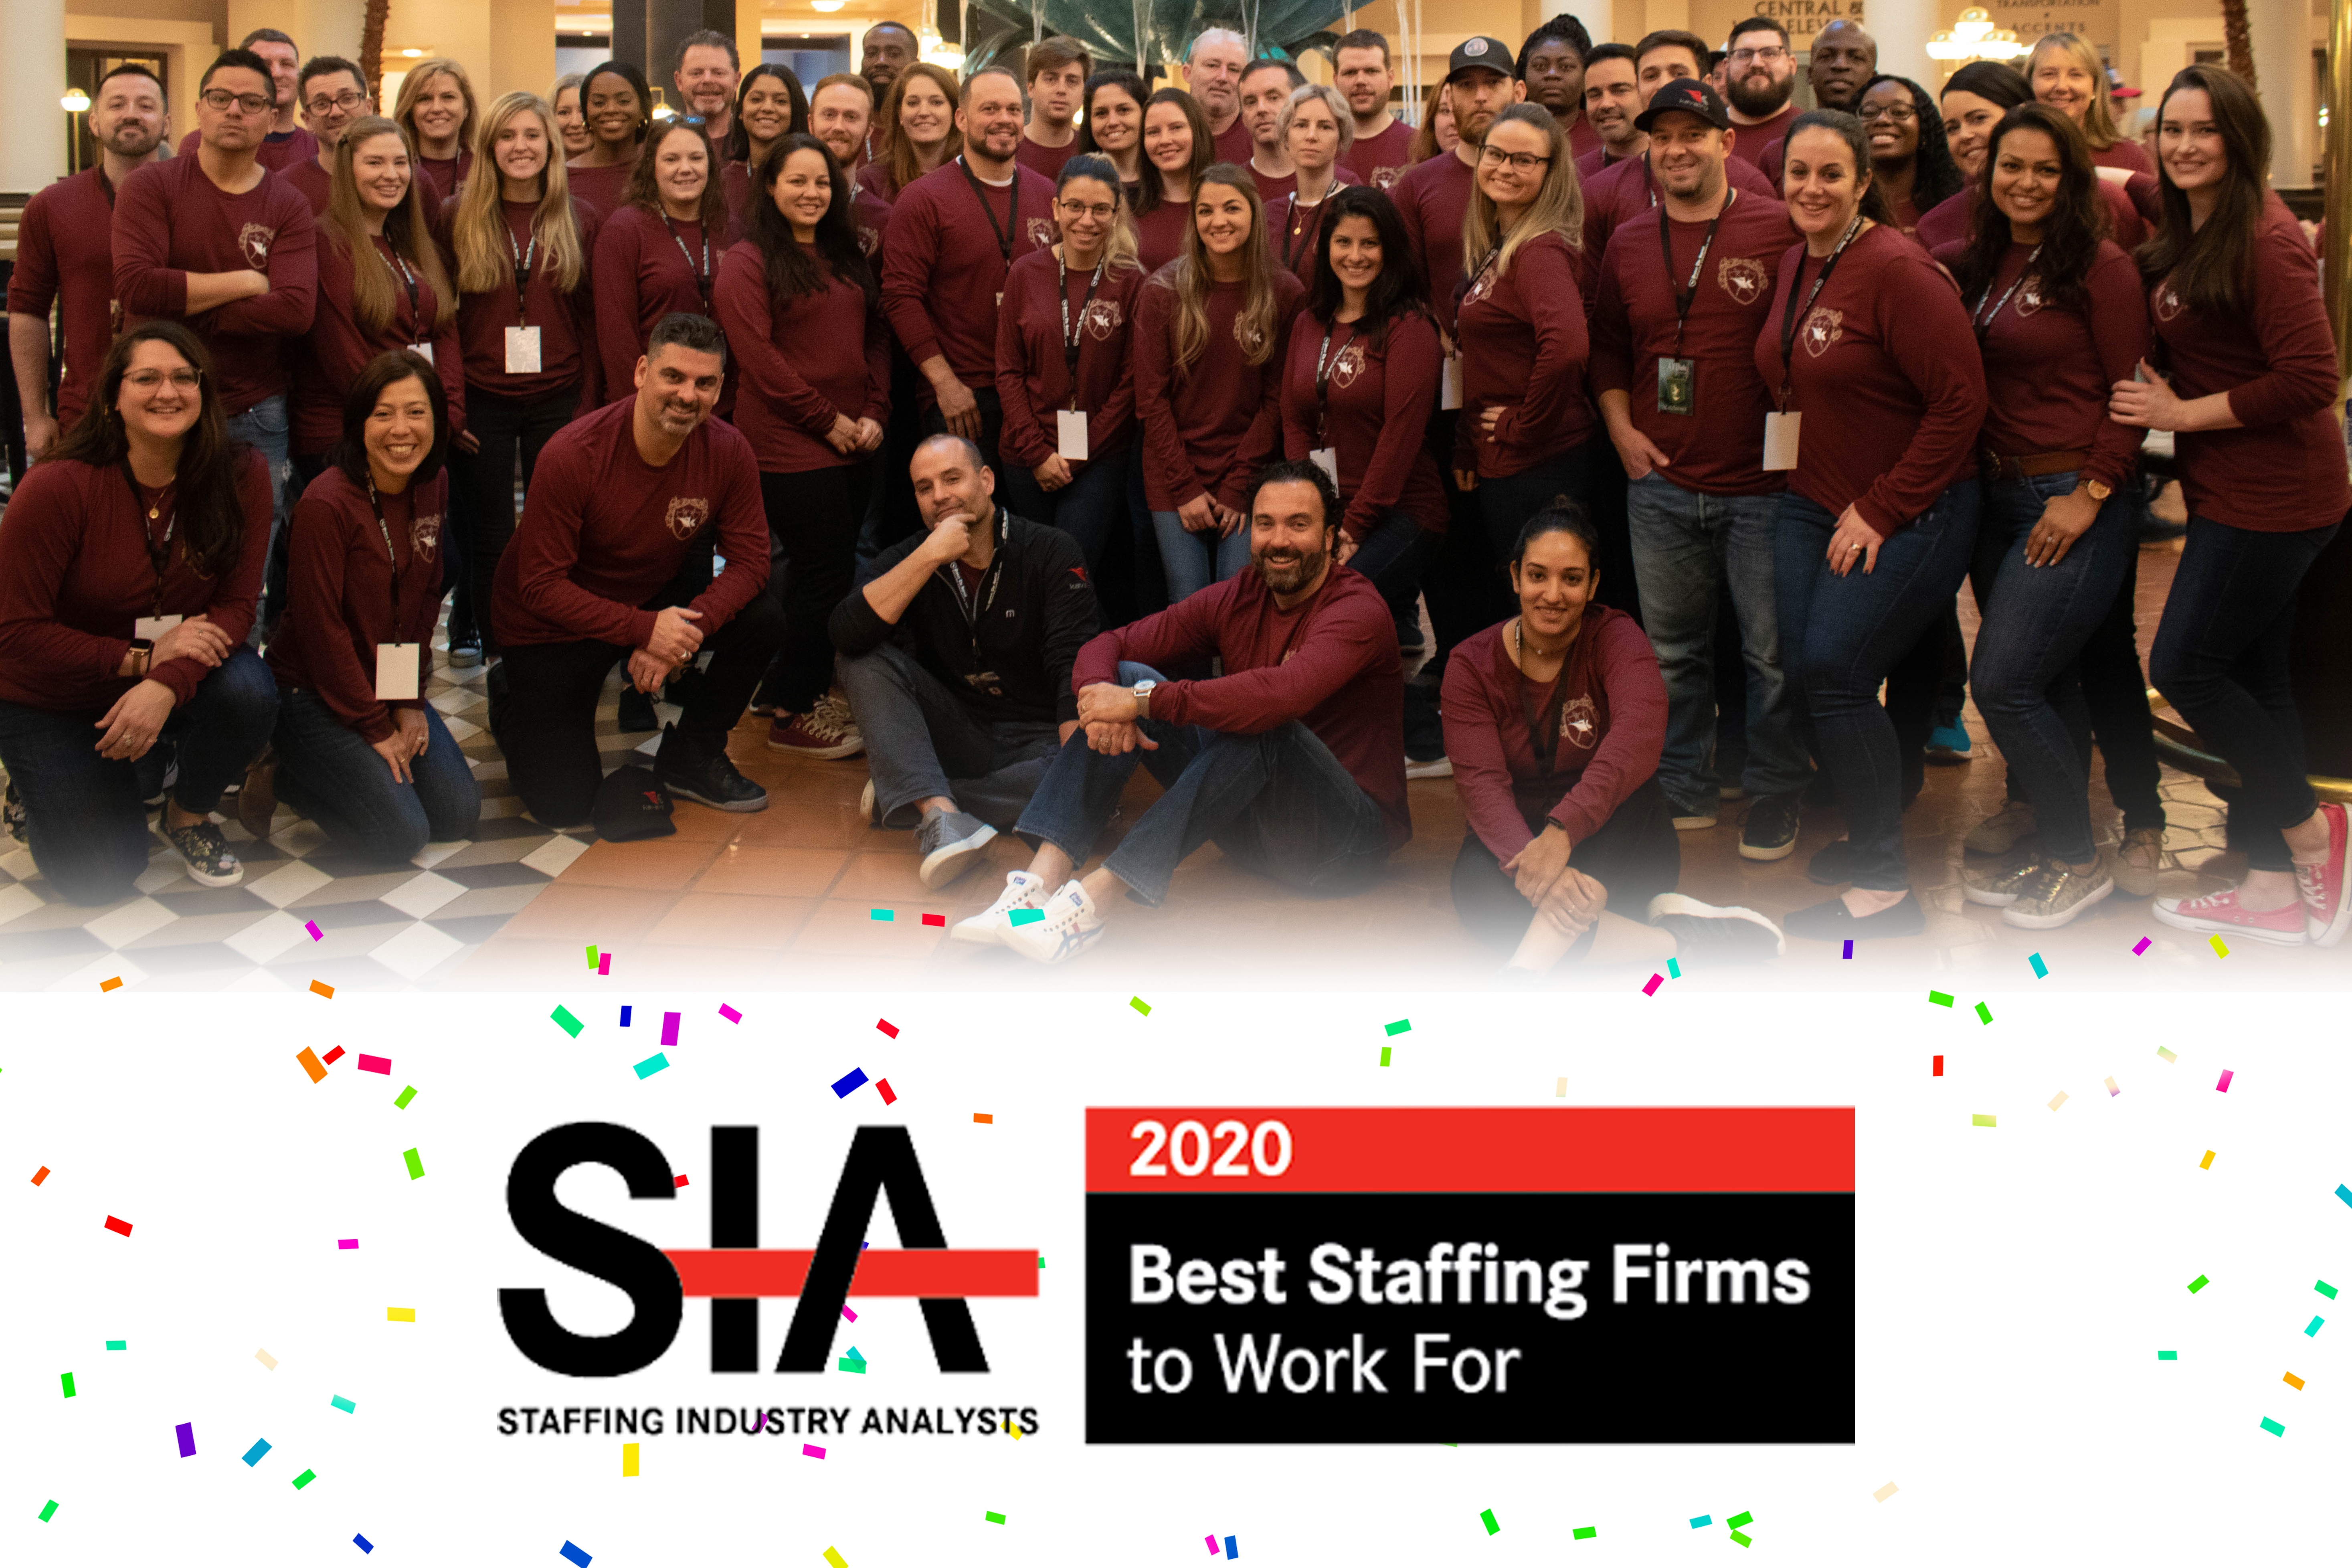 Kavaliro Recognized one of SIA’s 2020 Best Staffing Firms to Work For